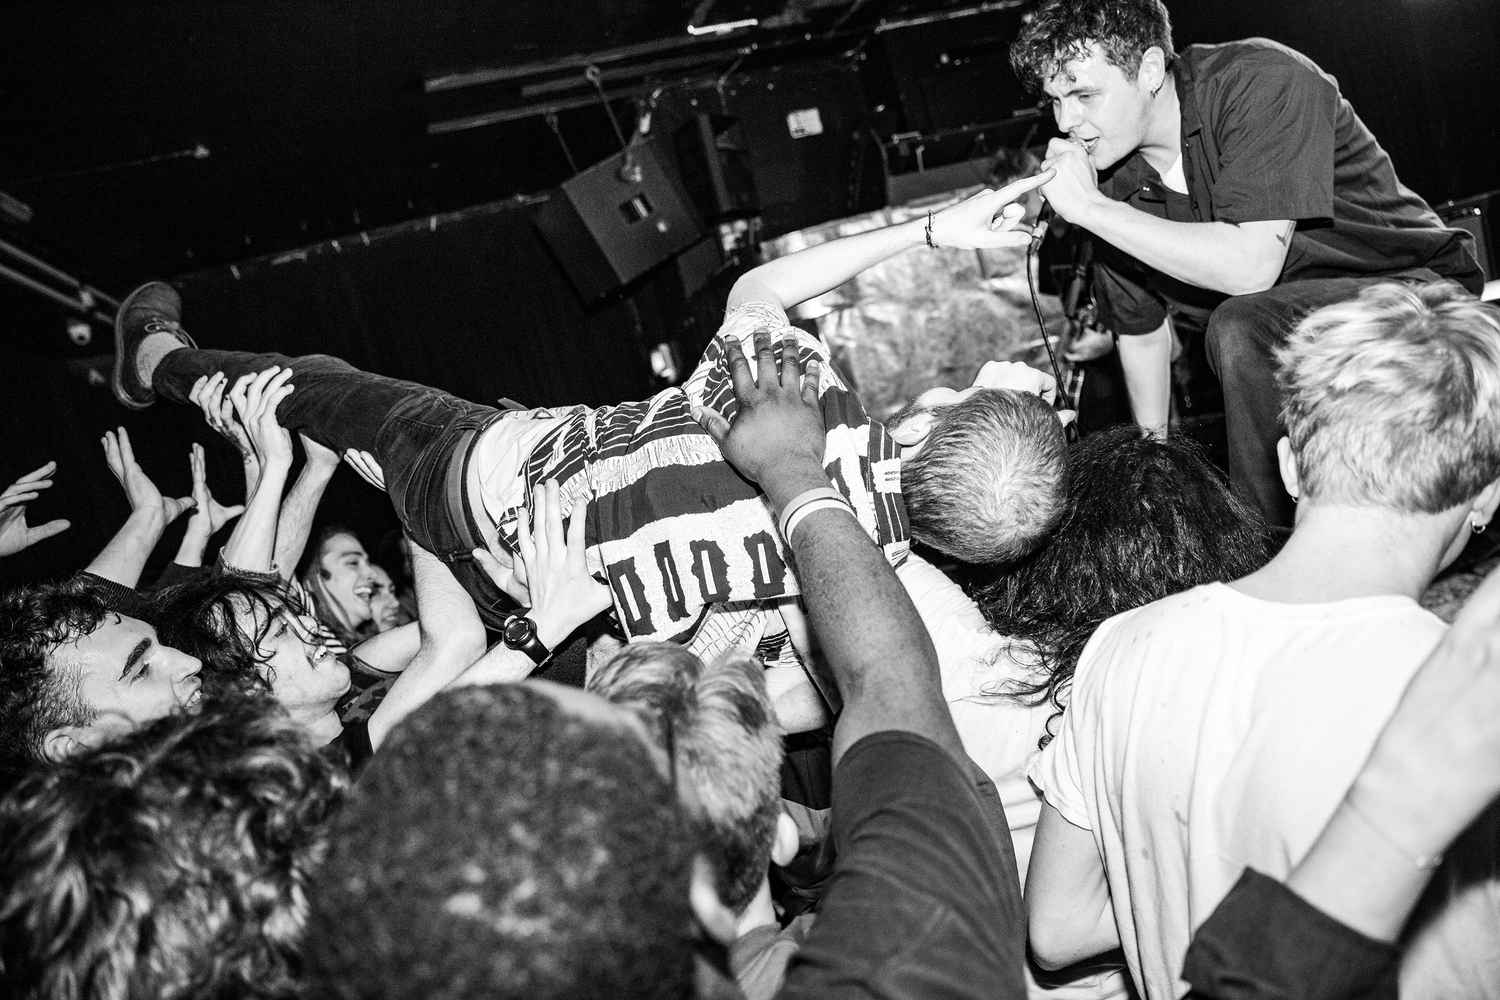 Crowdsurfers, mosh pits and general carnage are the order of the day at Yowl's celebratory Jäger Curtain Call headline show